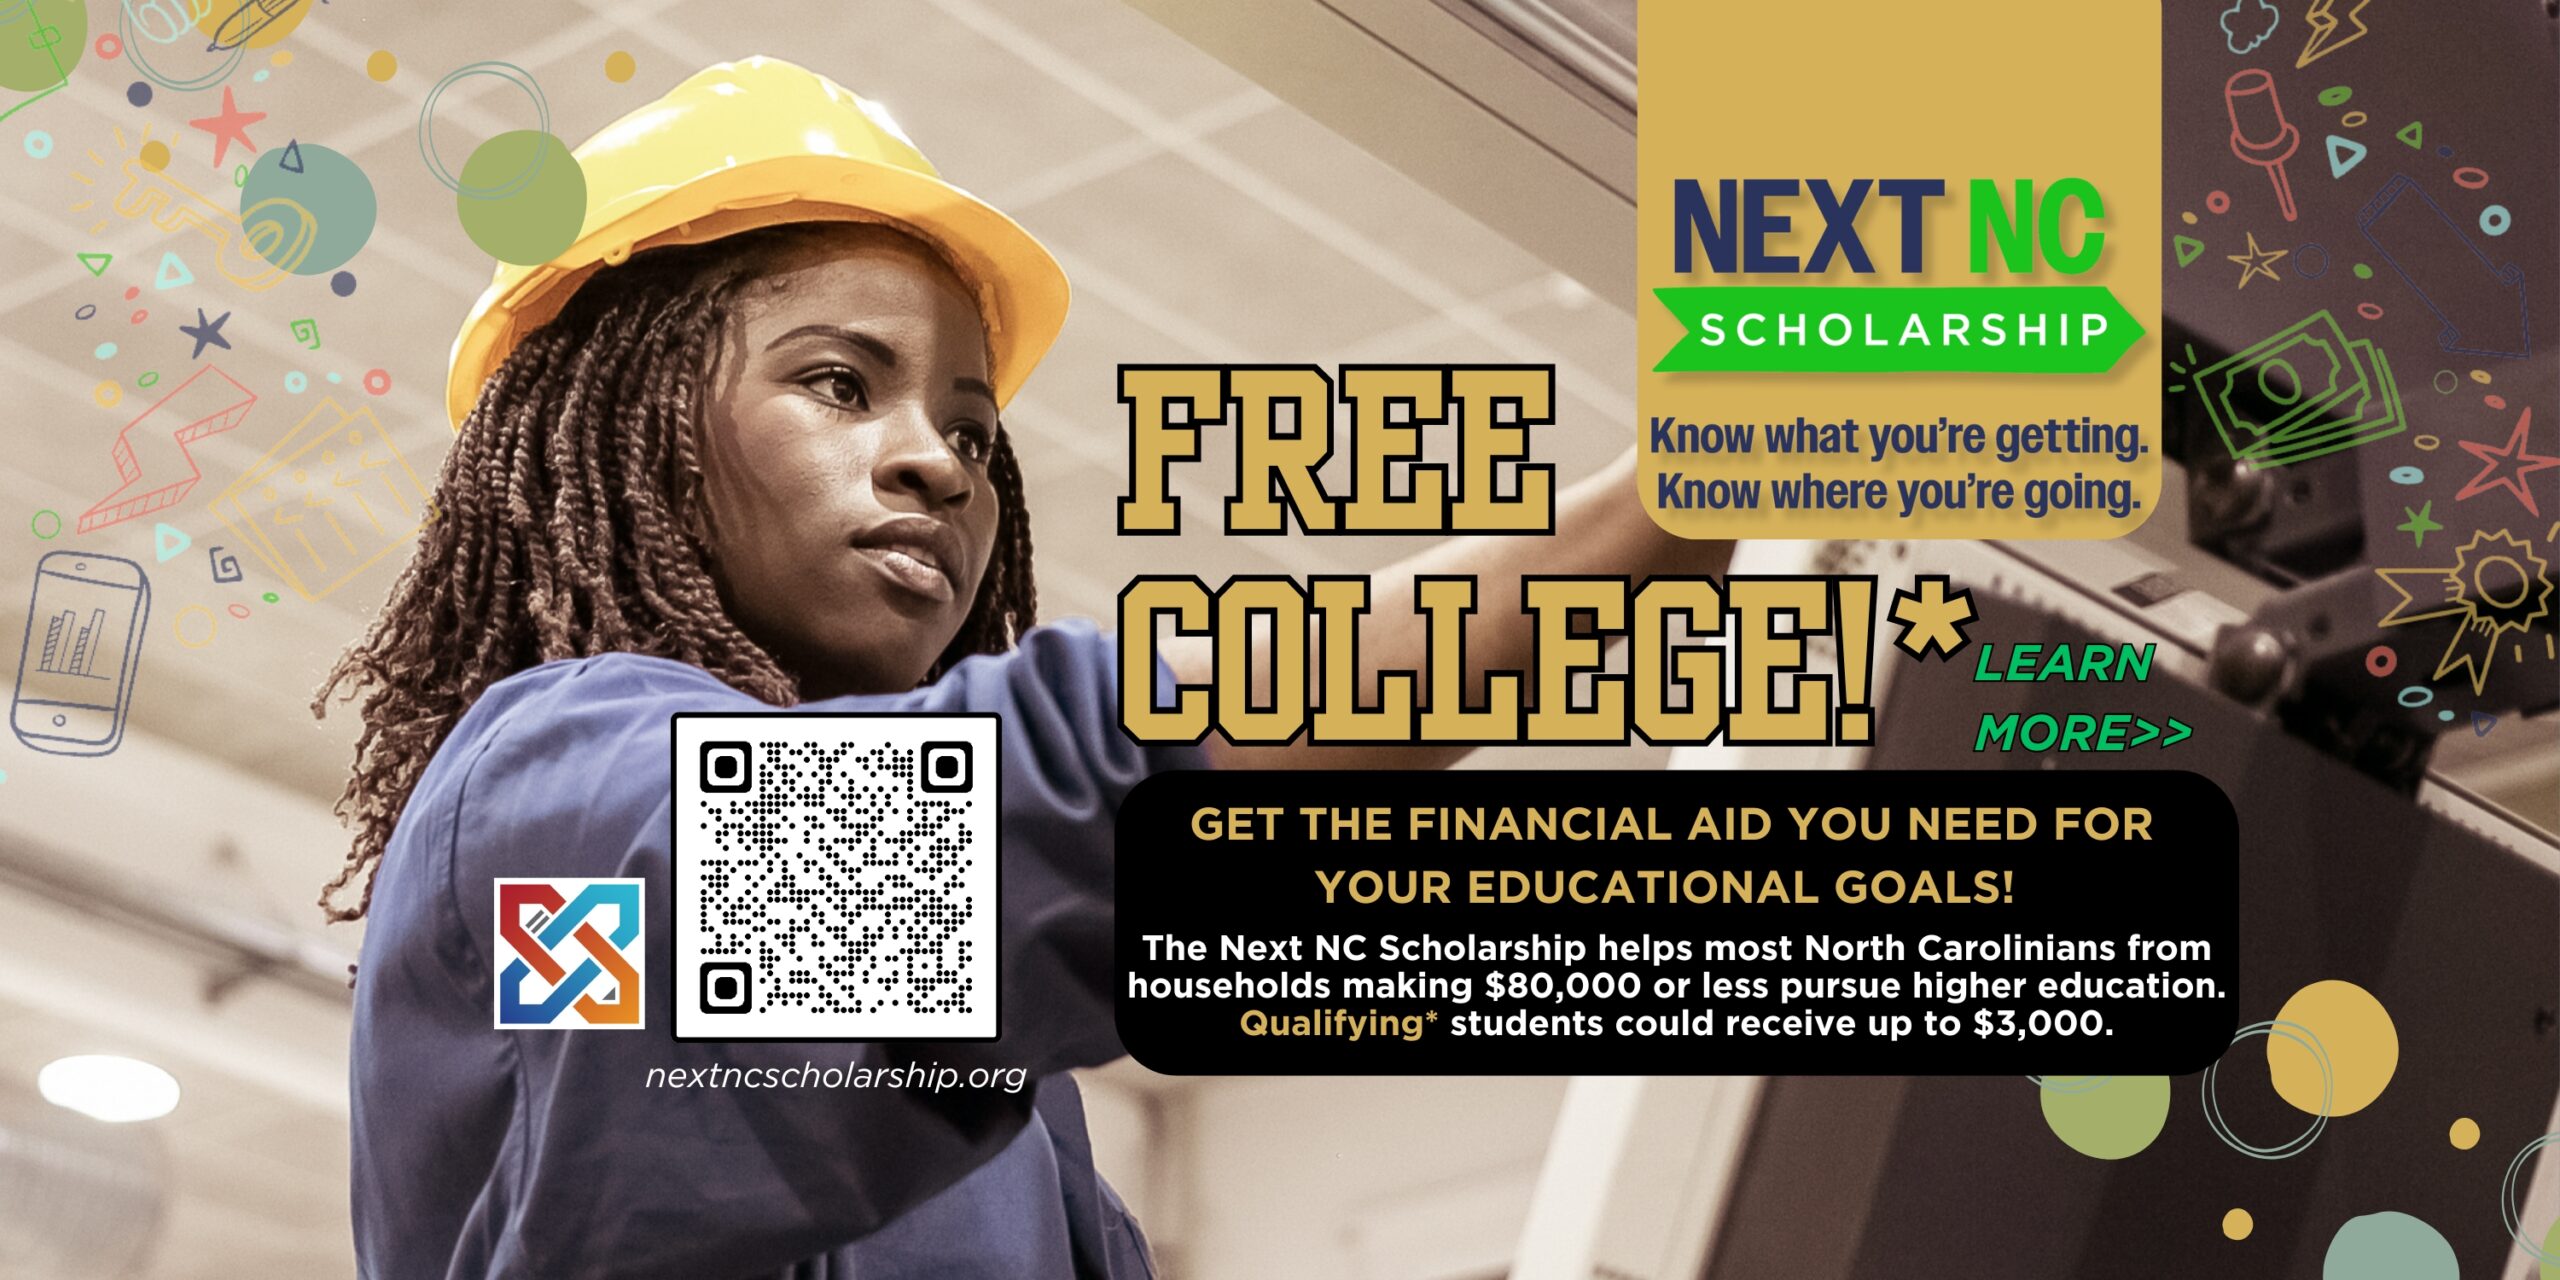 Banner that reads "Next NC Scholarship - Know what you're getting. Know where you're going. | Free College!* Learn More - Get the Financial Aid You Need For Your Educational Goals! | The Next NC Scholarship helps most North Carolinians from households making $80,000 or less pursue higher education. Qualifying* students could receive up to $3,000." Click the banner or visit nextncscholarship.org for more info.